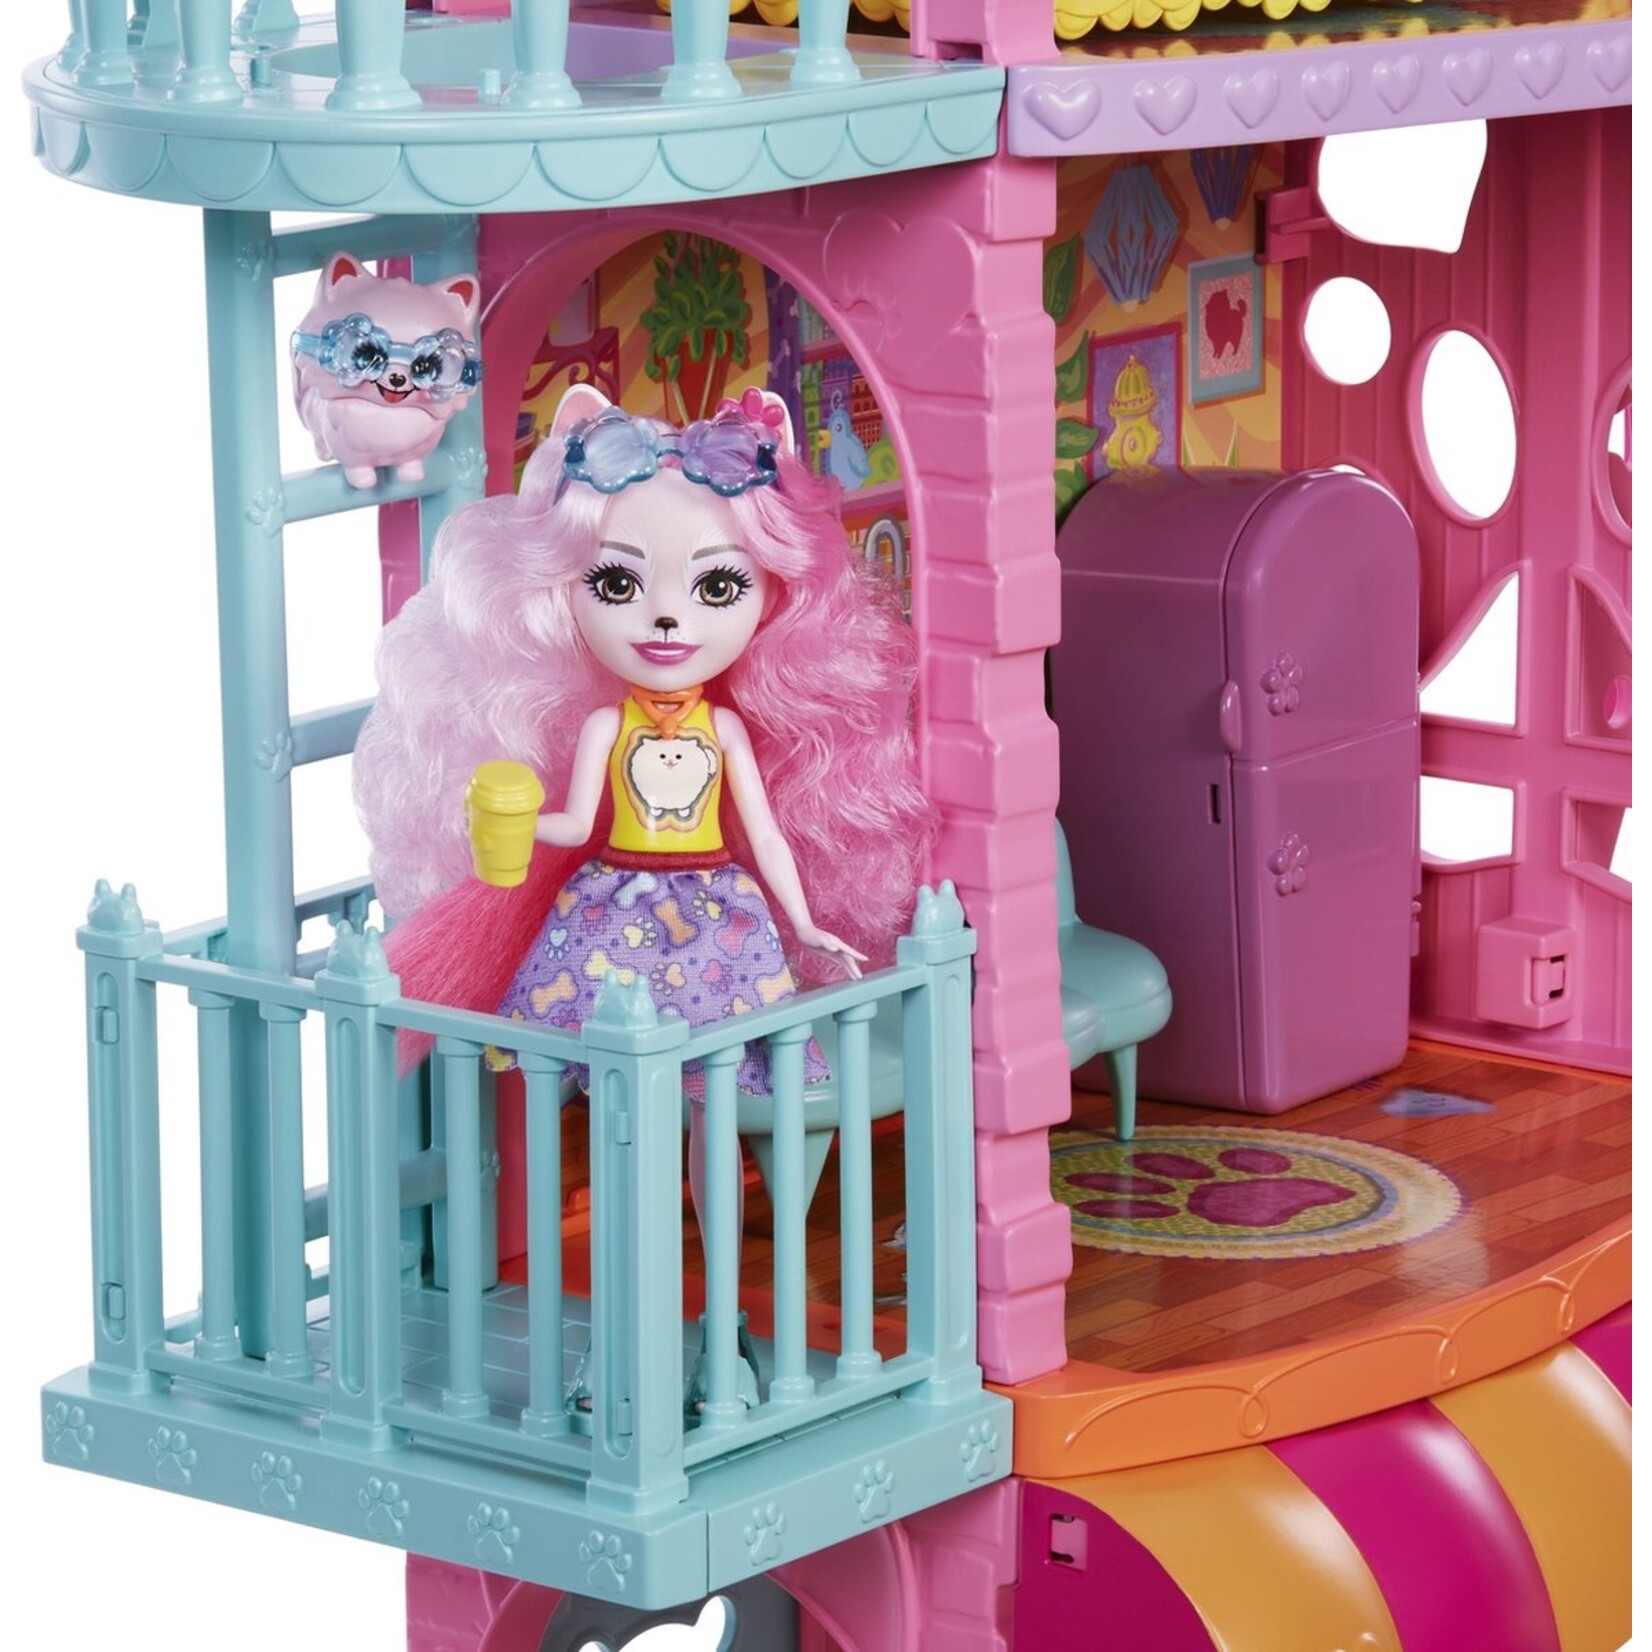 Enchantimals Enchantimals Townhouse - Toy set - Dollhouse - From 4 years old